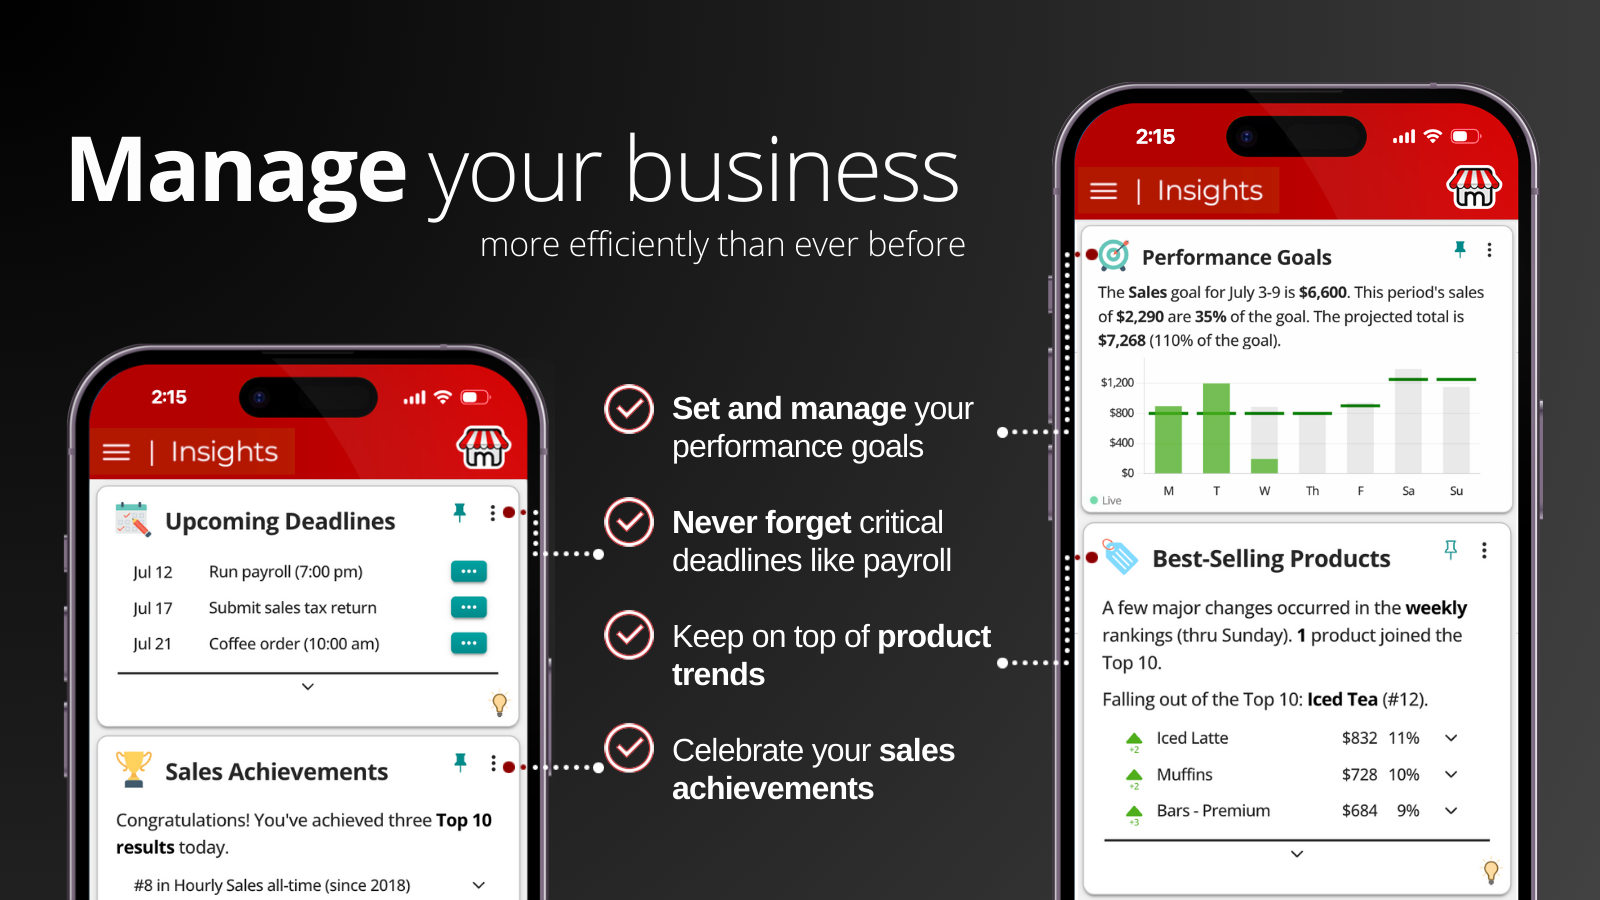 Manage your business more efficiently than ever before